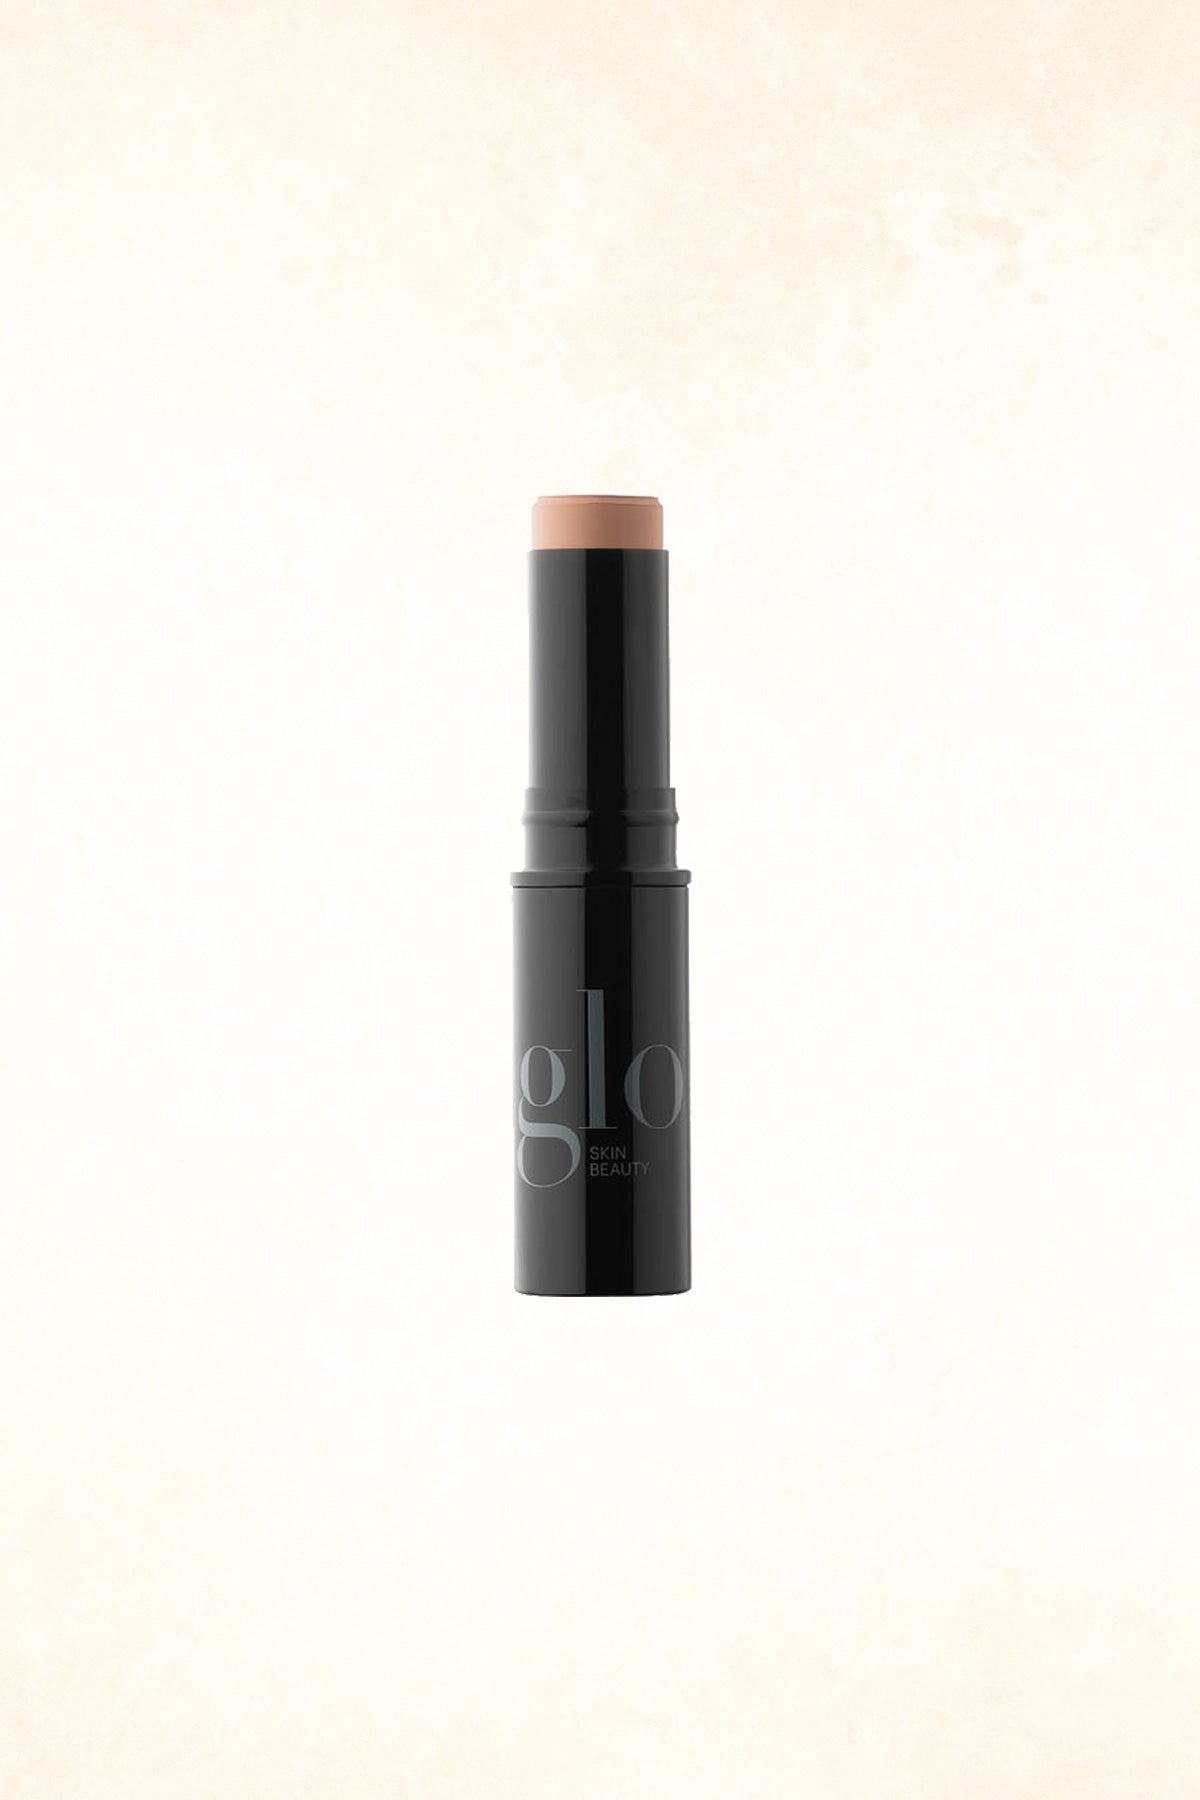 Glo Skin Beauty - HD MIneral Foundation Stick - Fawn 5c